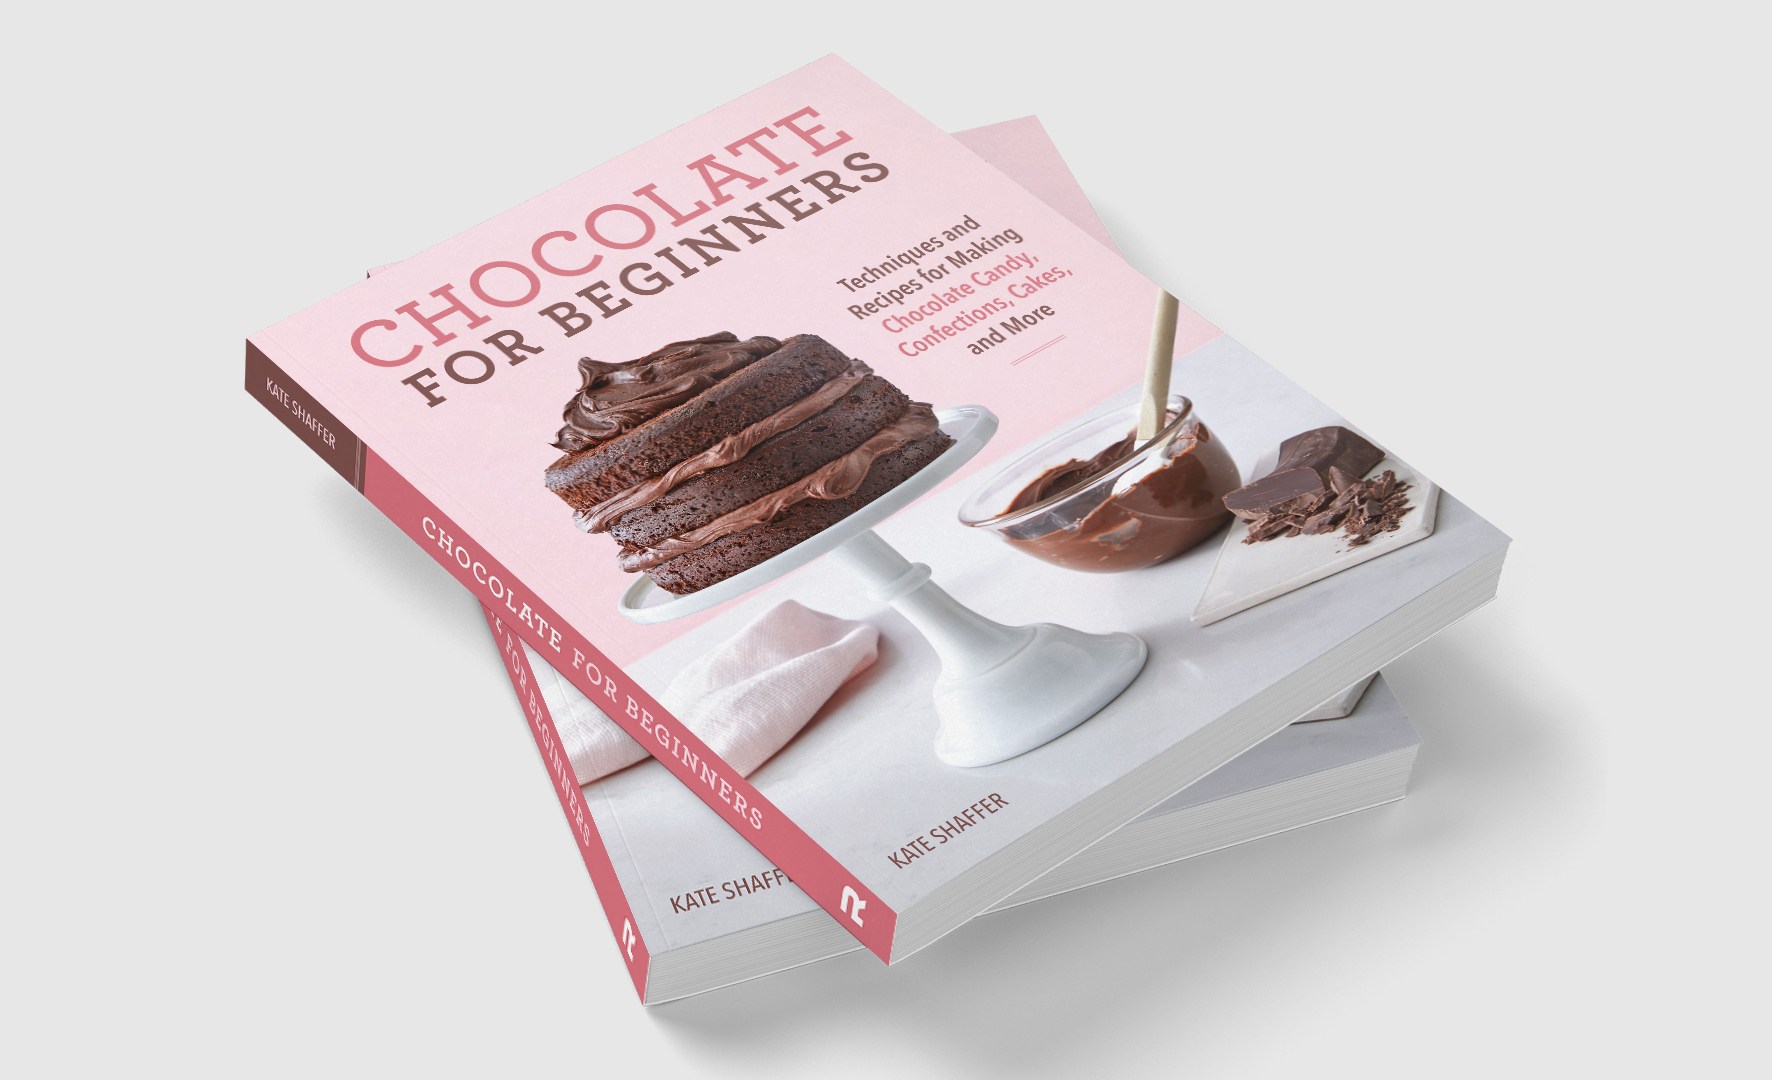 Chocolate for Beginners Book